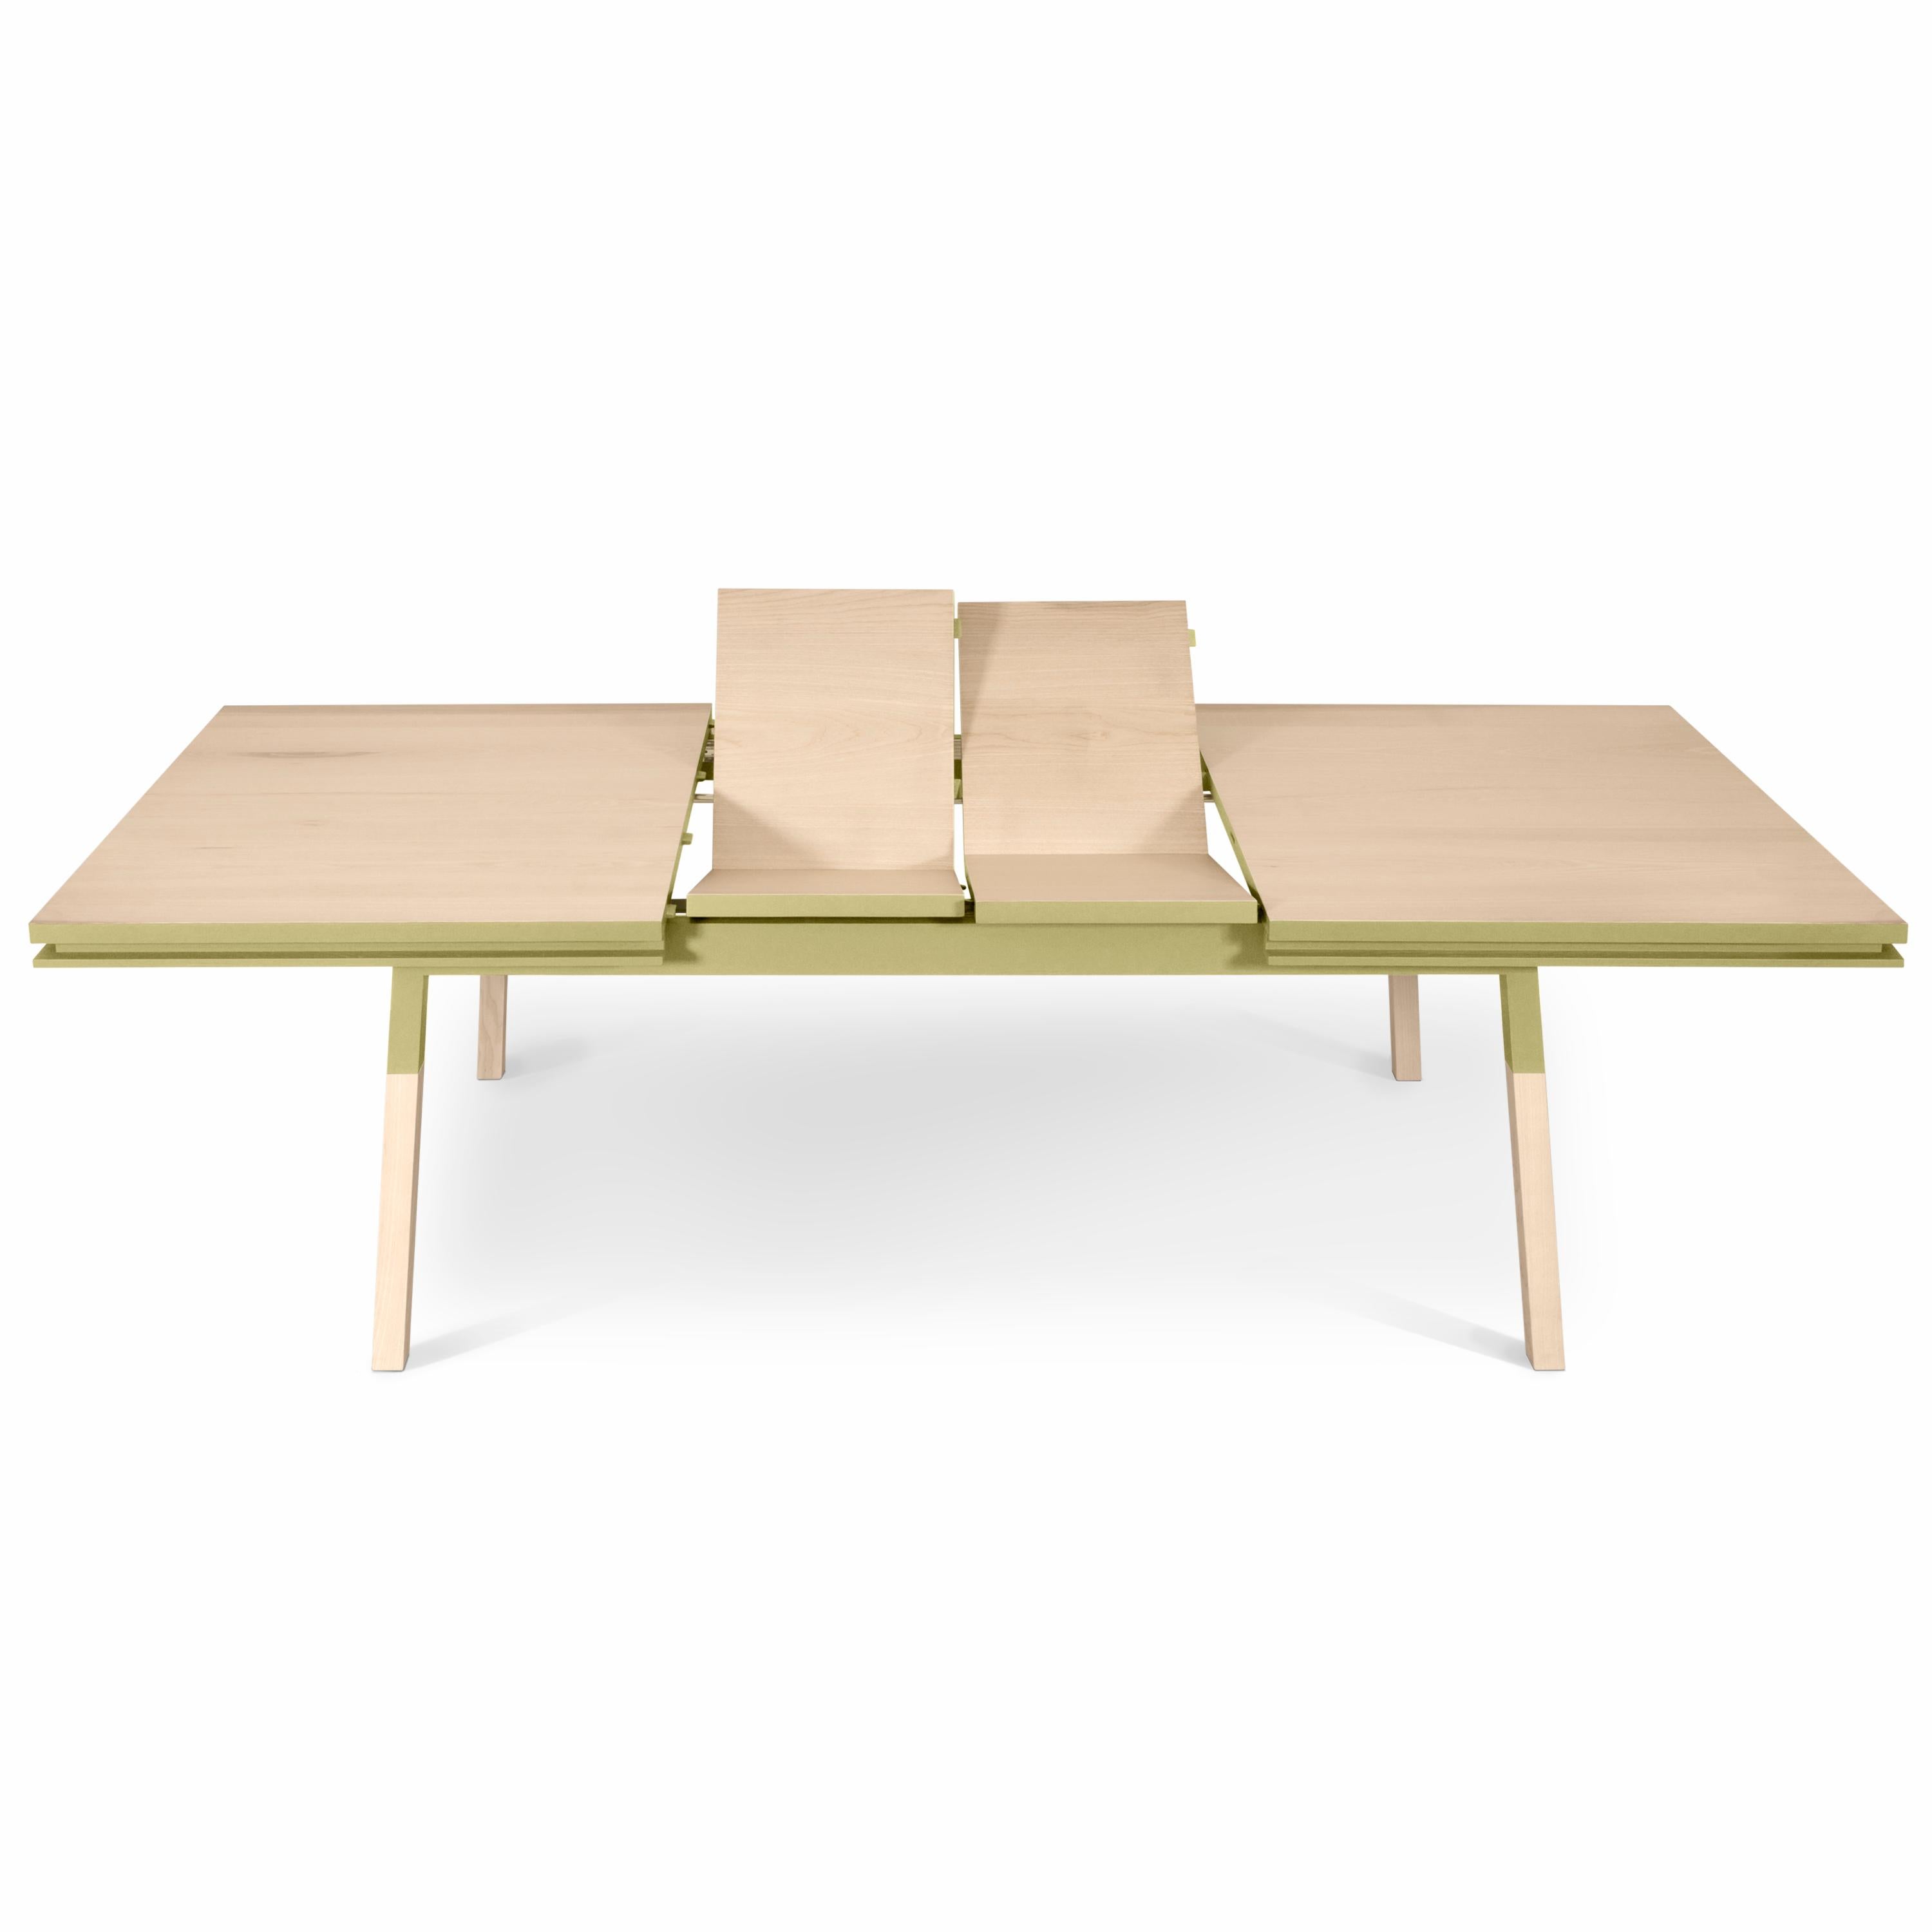 Scandinavian Modern Yellow short pants finish for this extensible dining table in solid wood For Sale